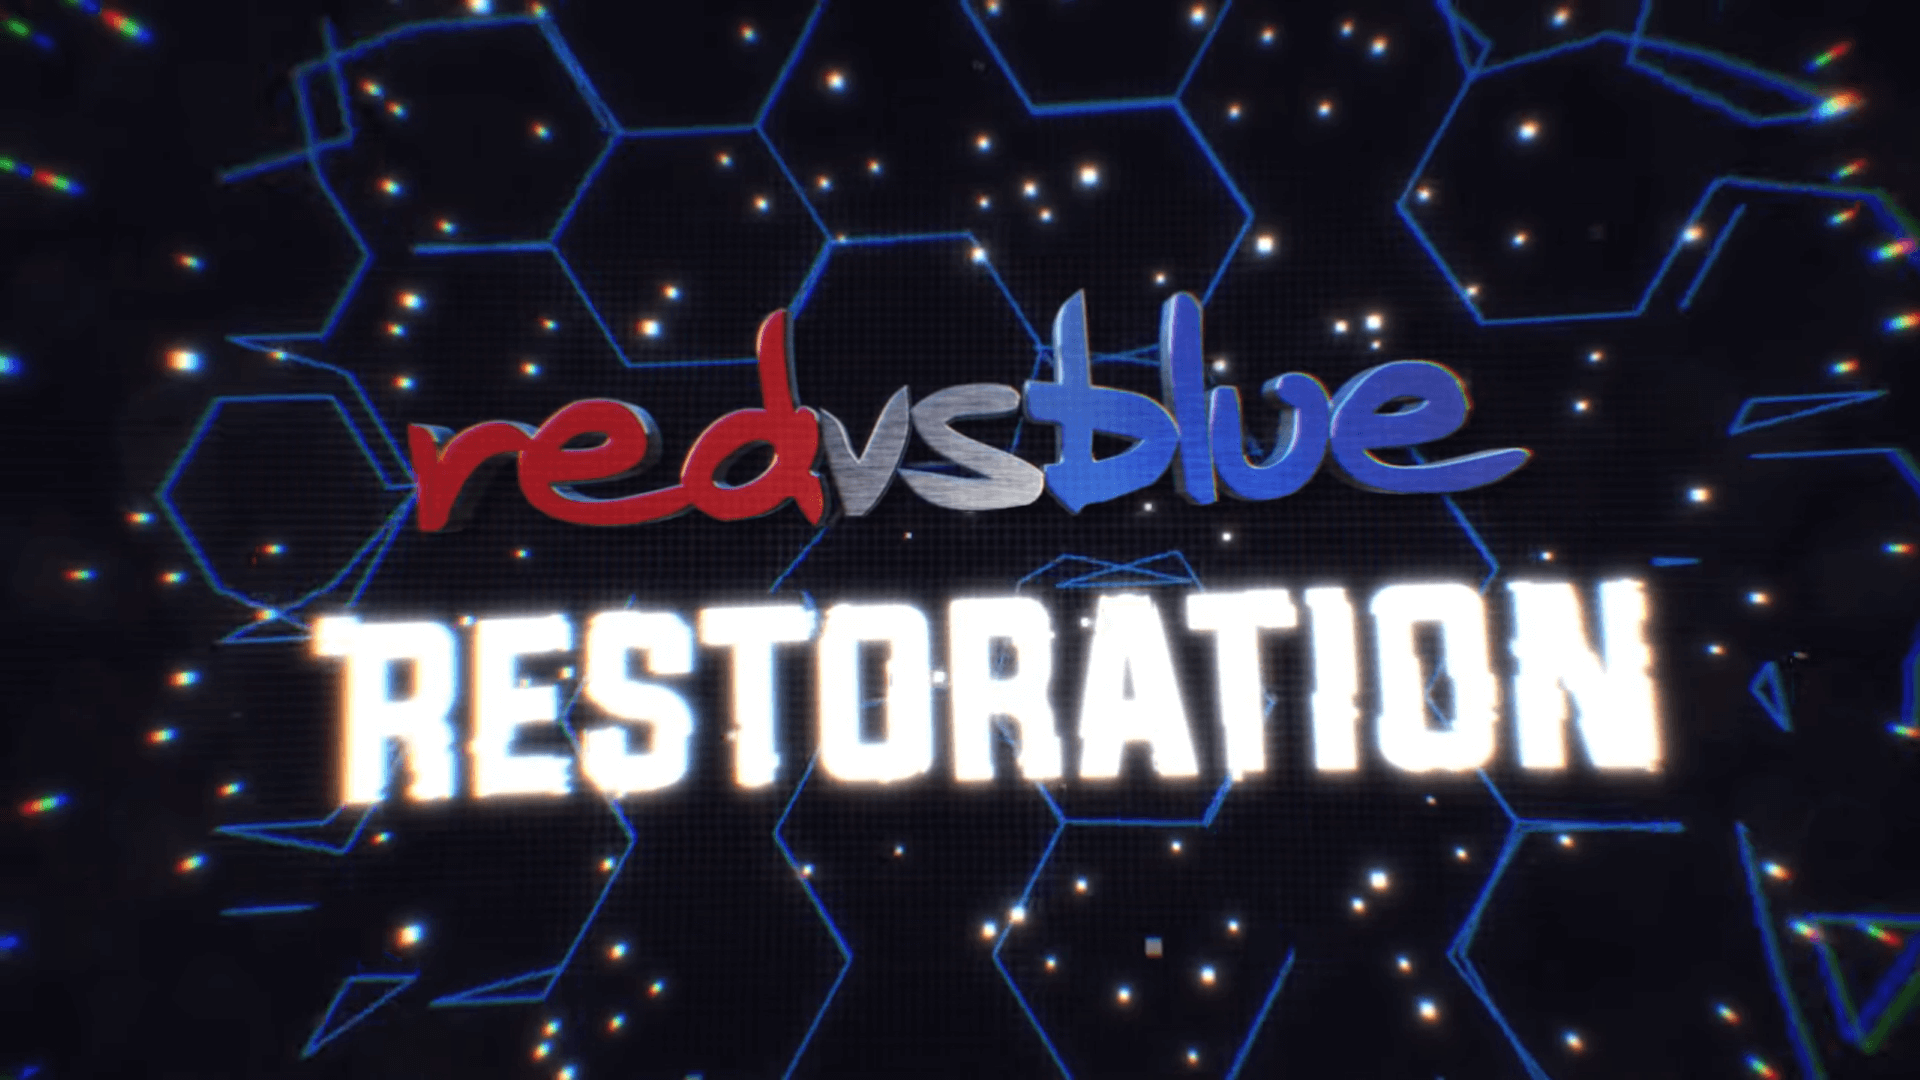 Red Vs Blue: Restoration Coming To Digital on May 7